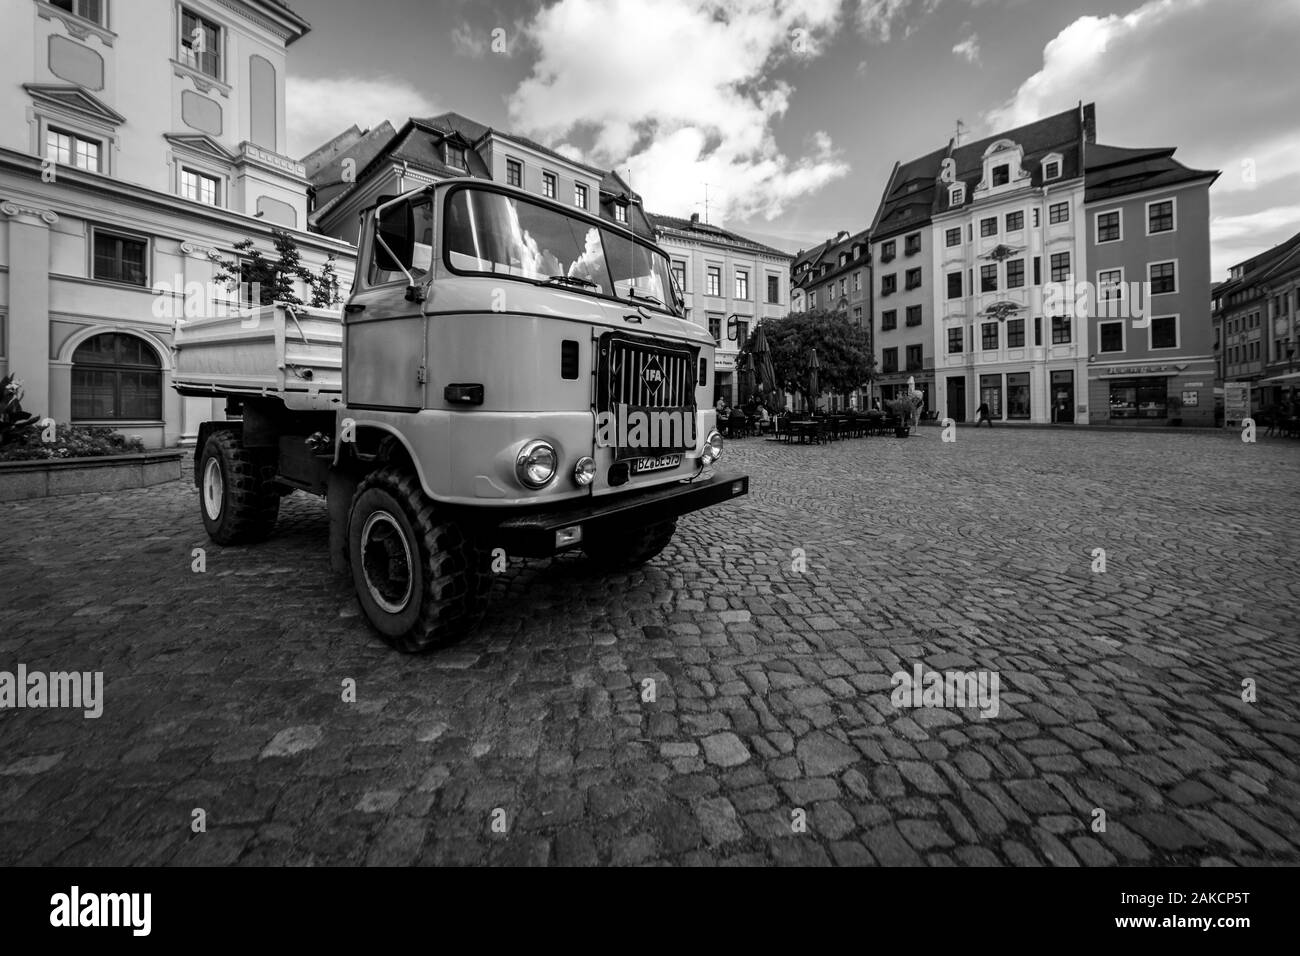 BAUTZEN, GERMANY - OCTOBER 10, 2019: City Hall Square and a medium-duty truck IFA W50 in the foreground. Black and white. Stock Photo